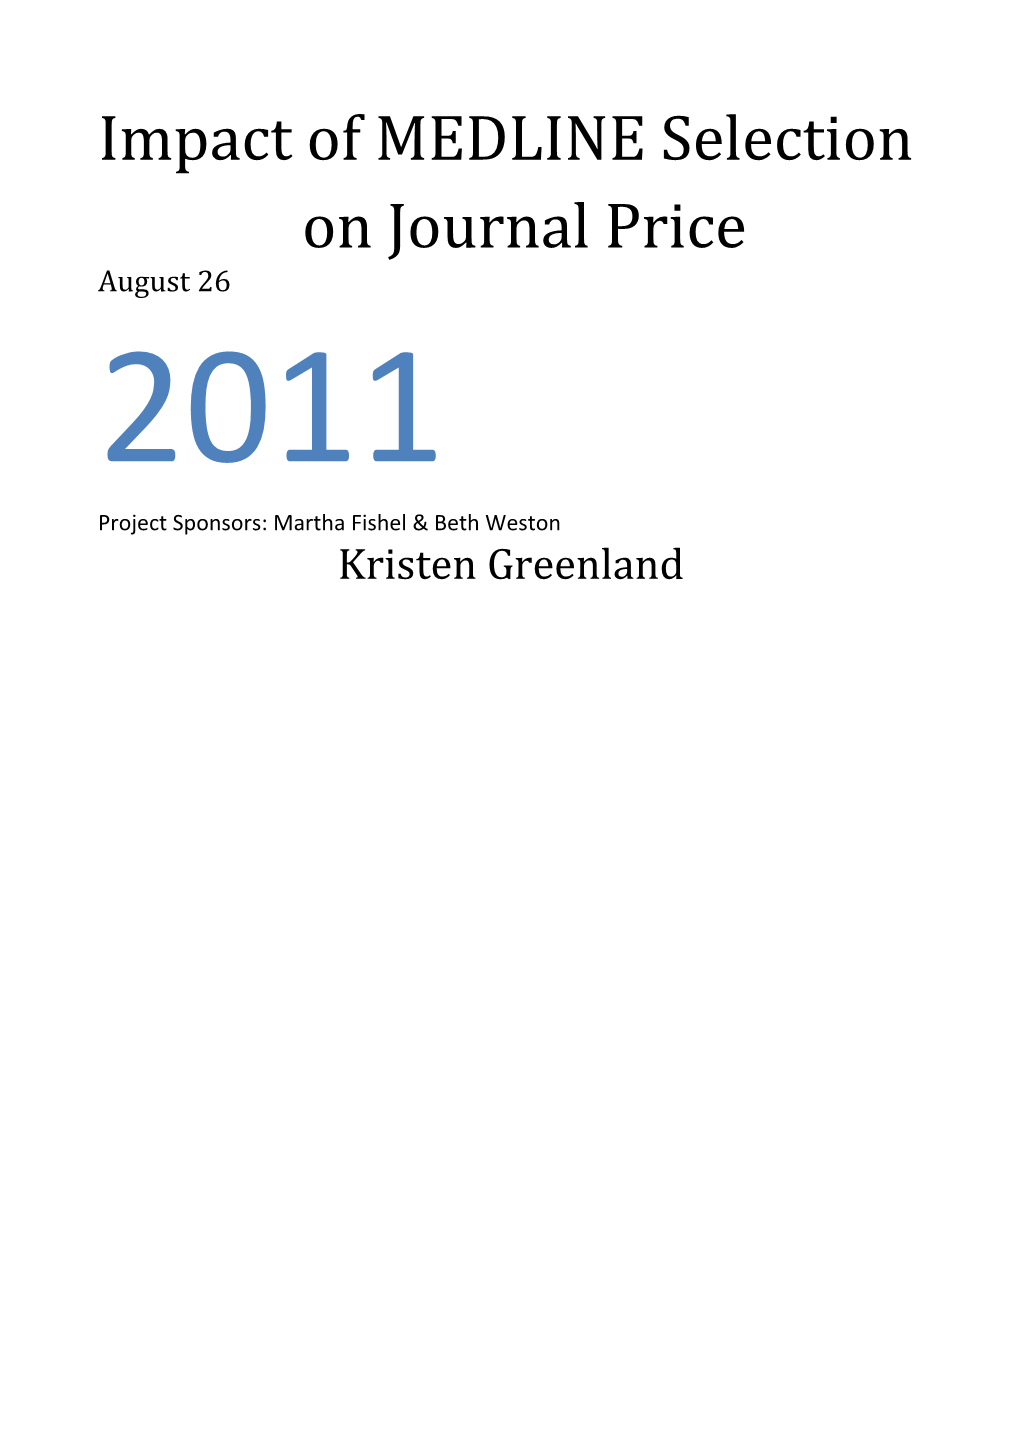 Impact of MEDLINE Selection on Journal Price